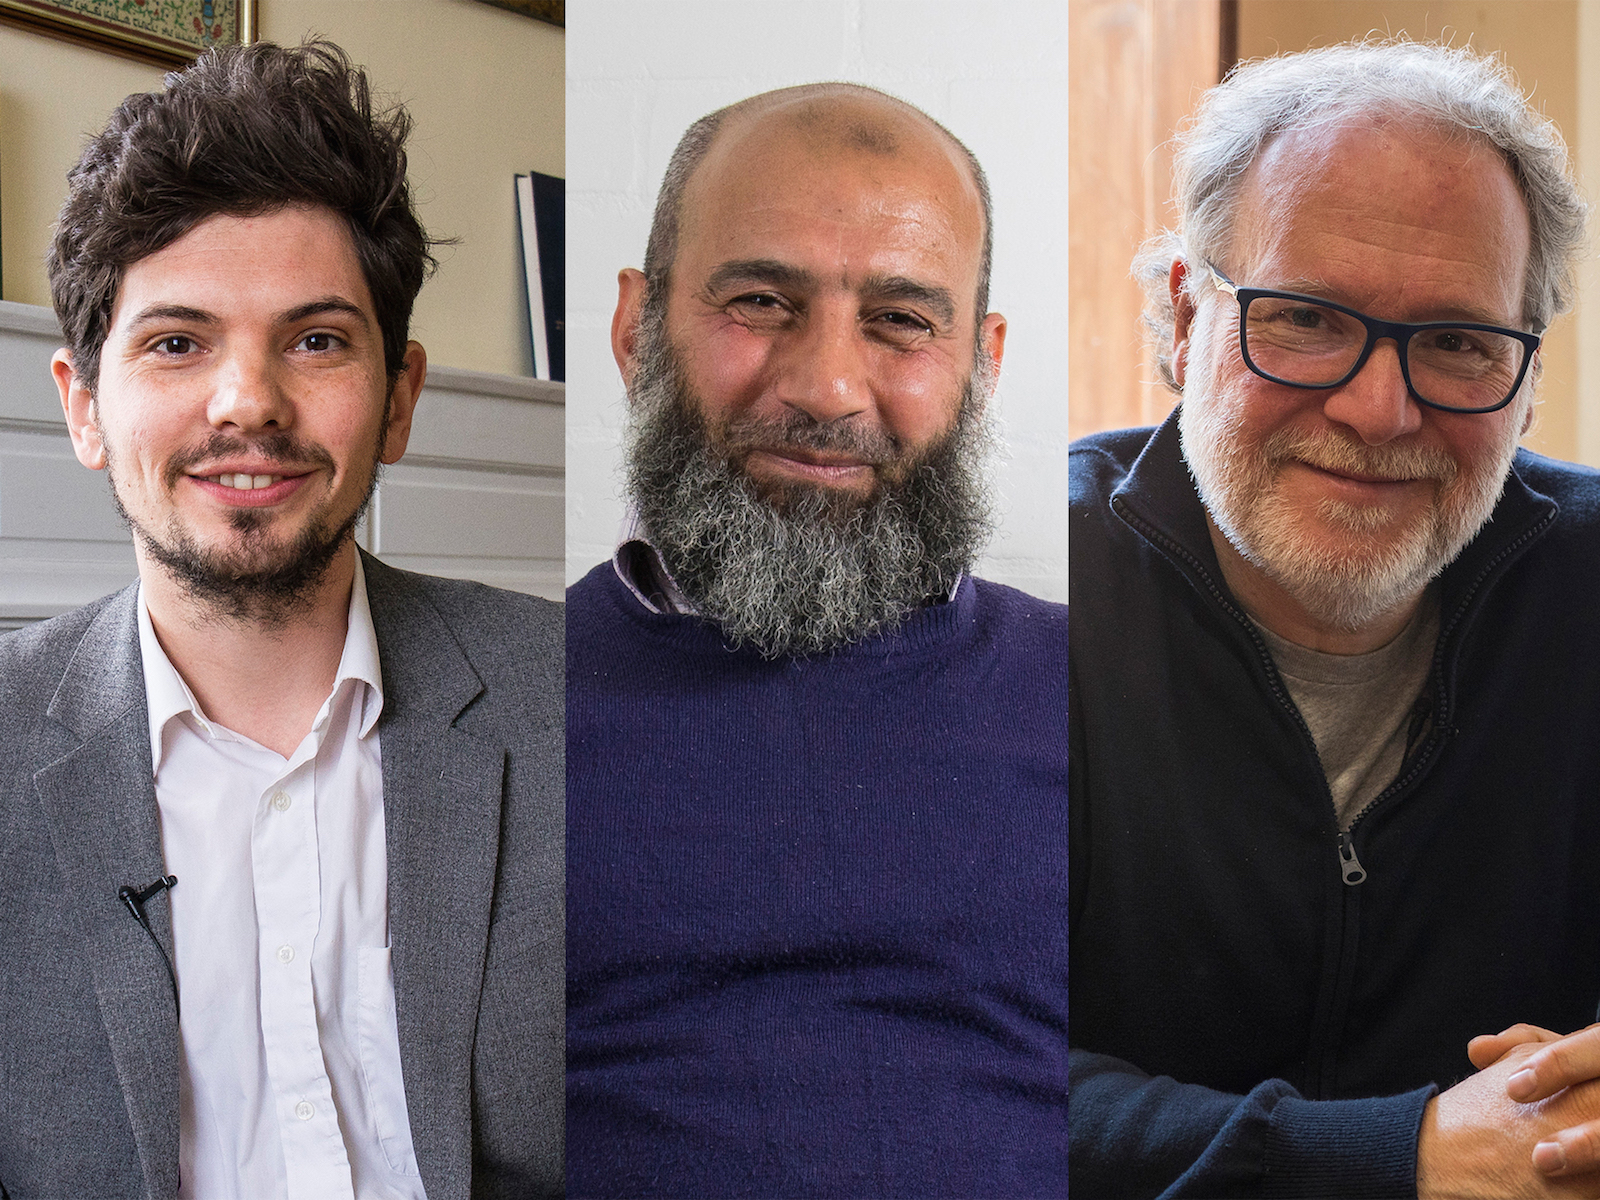 A priest, an imam, and a rabbi explain the economics of their religion to us